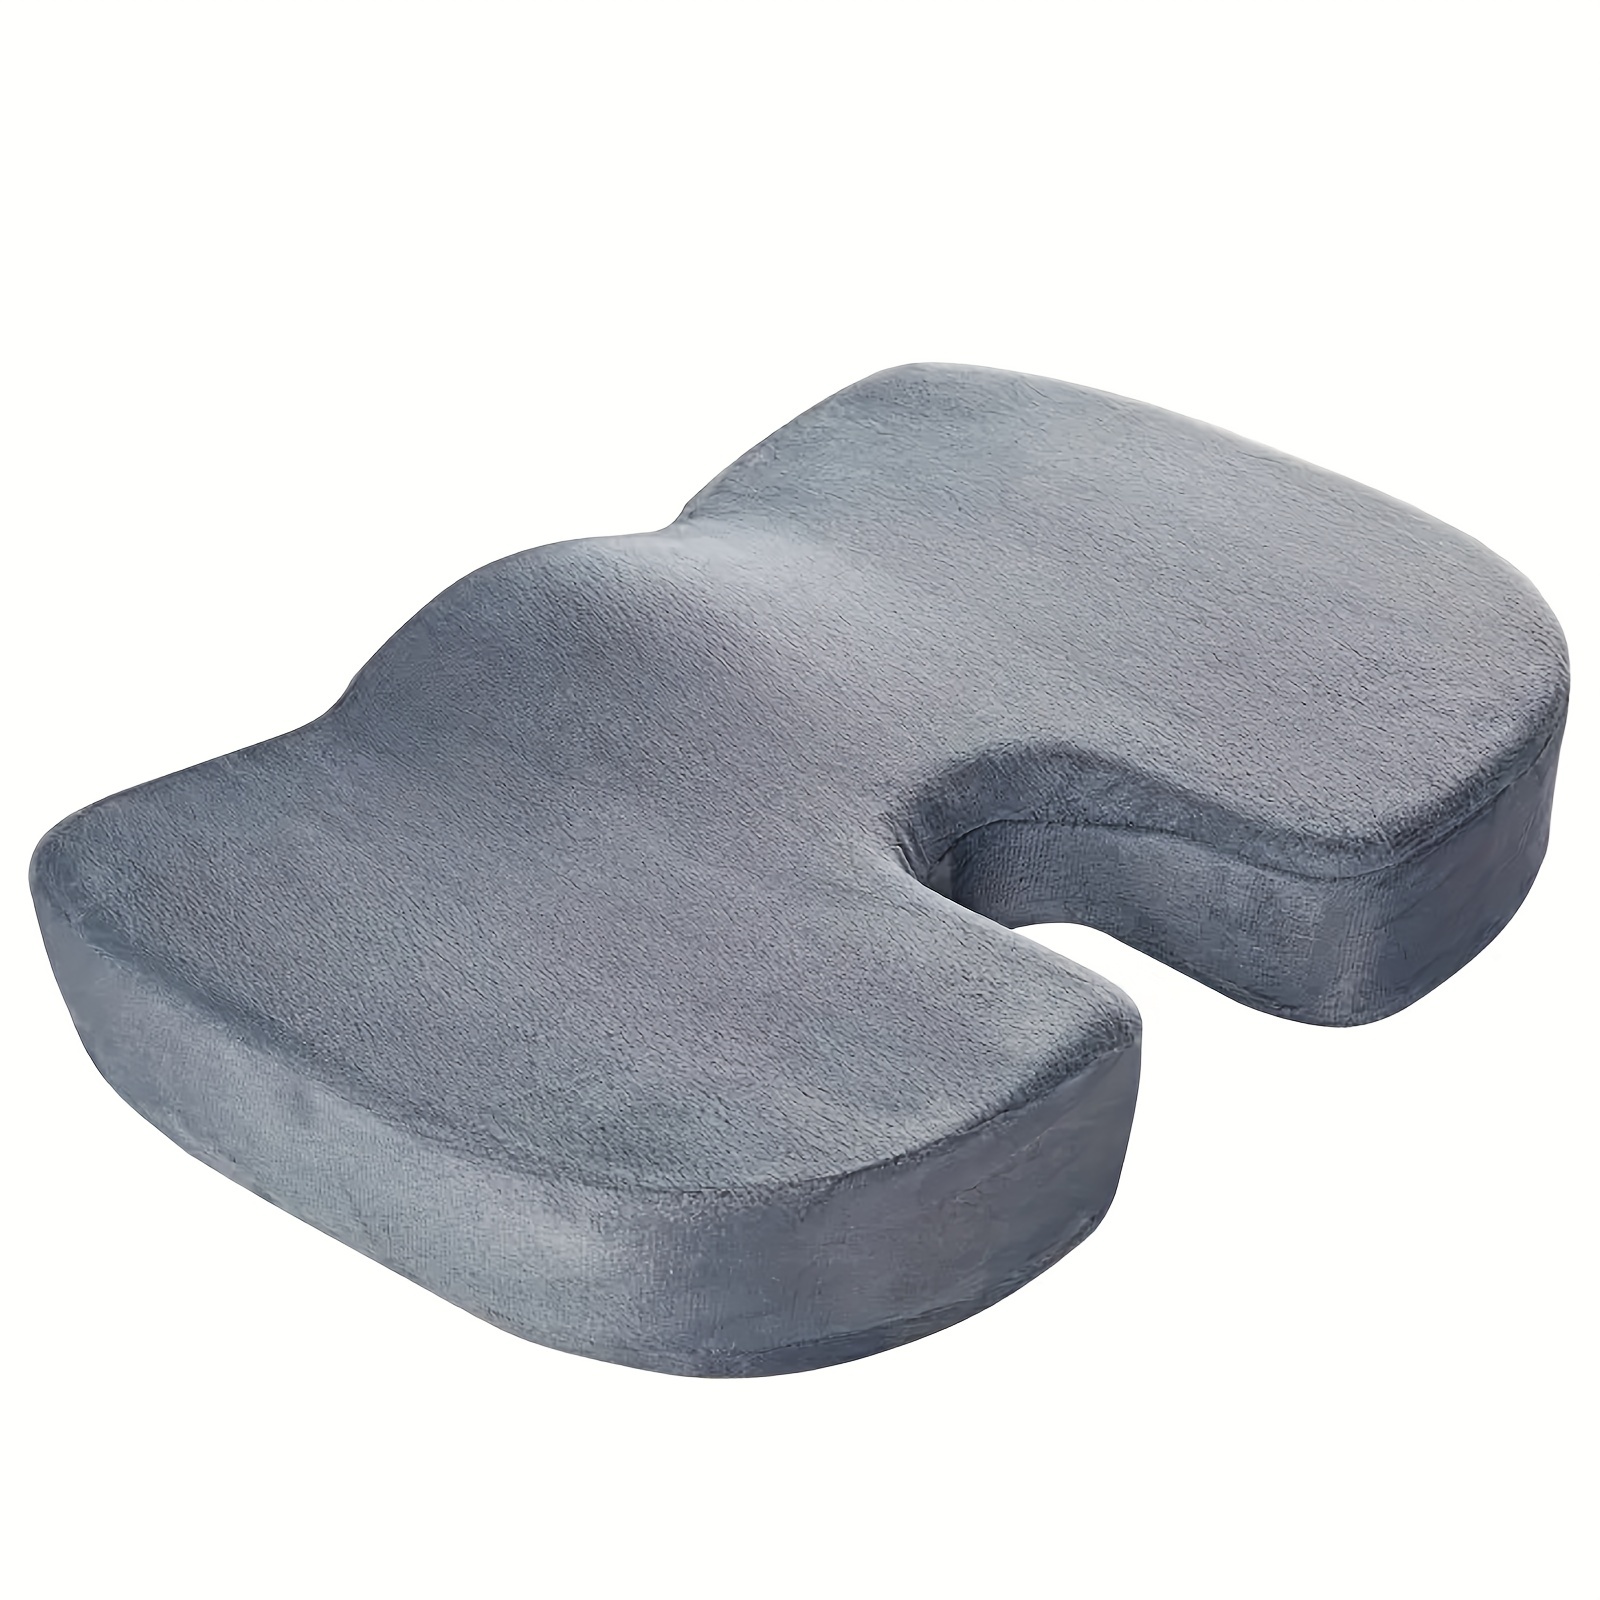 Comfort Seat Cushion - Office Chair Seat Cushion, Memory Space